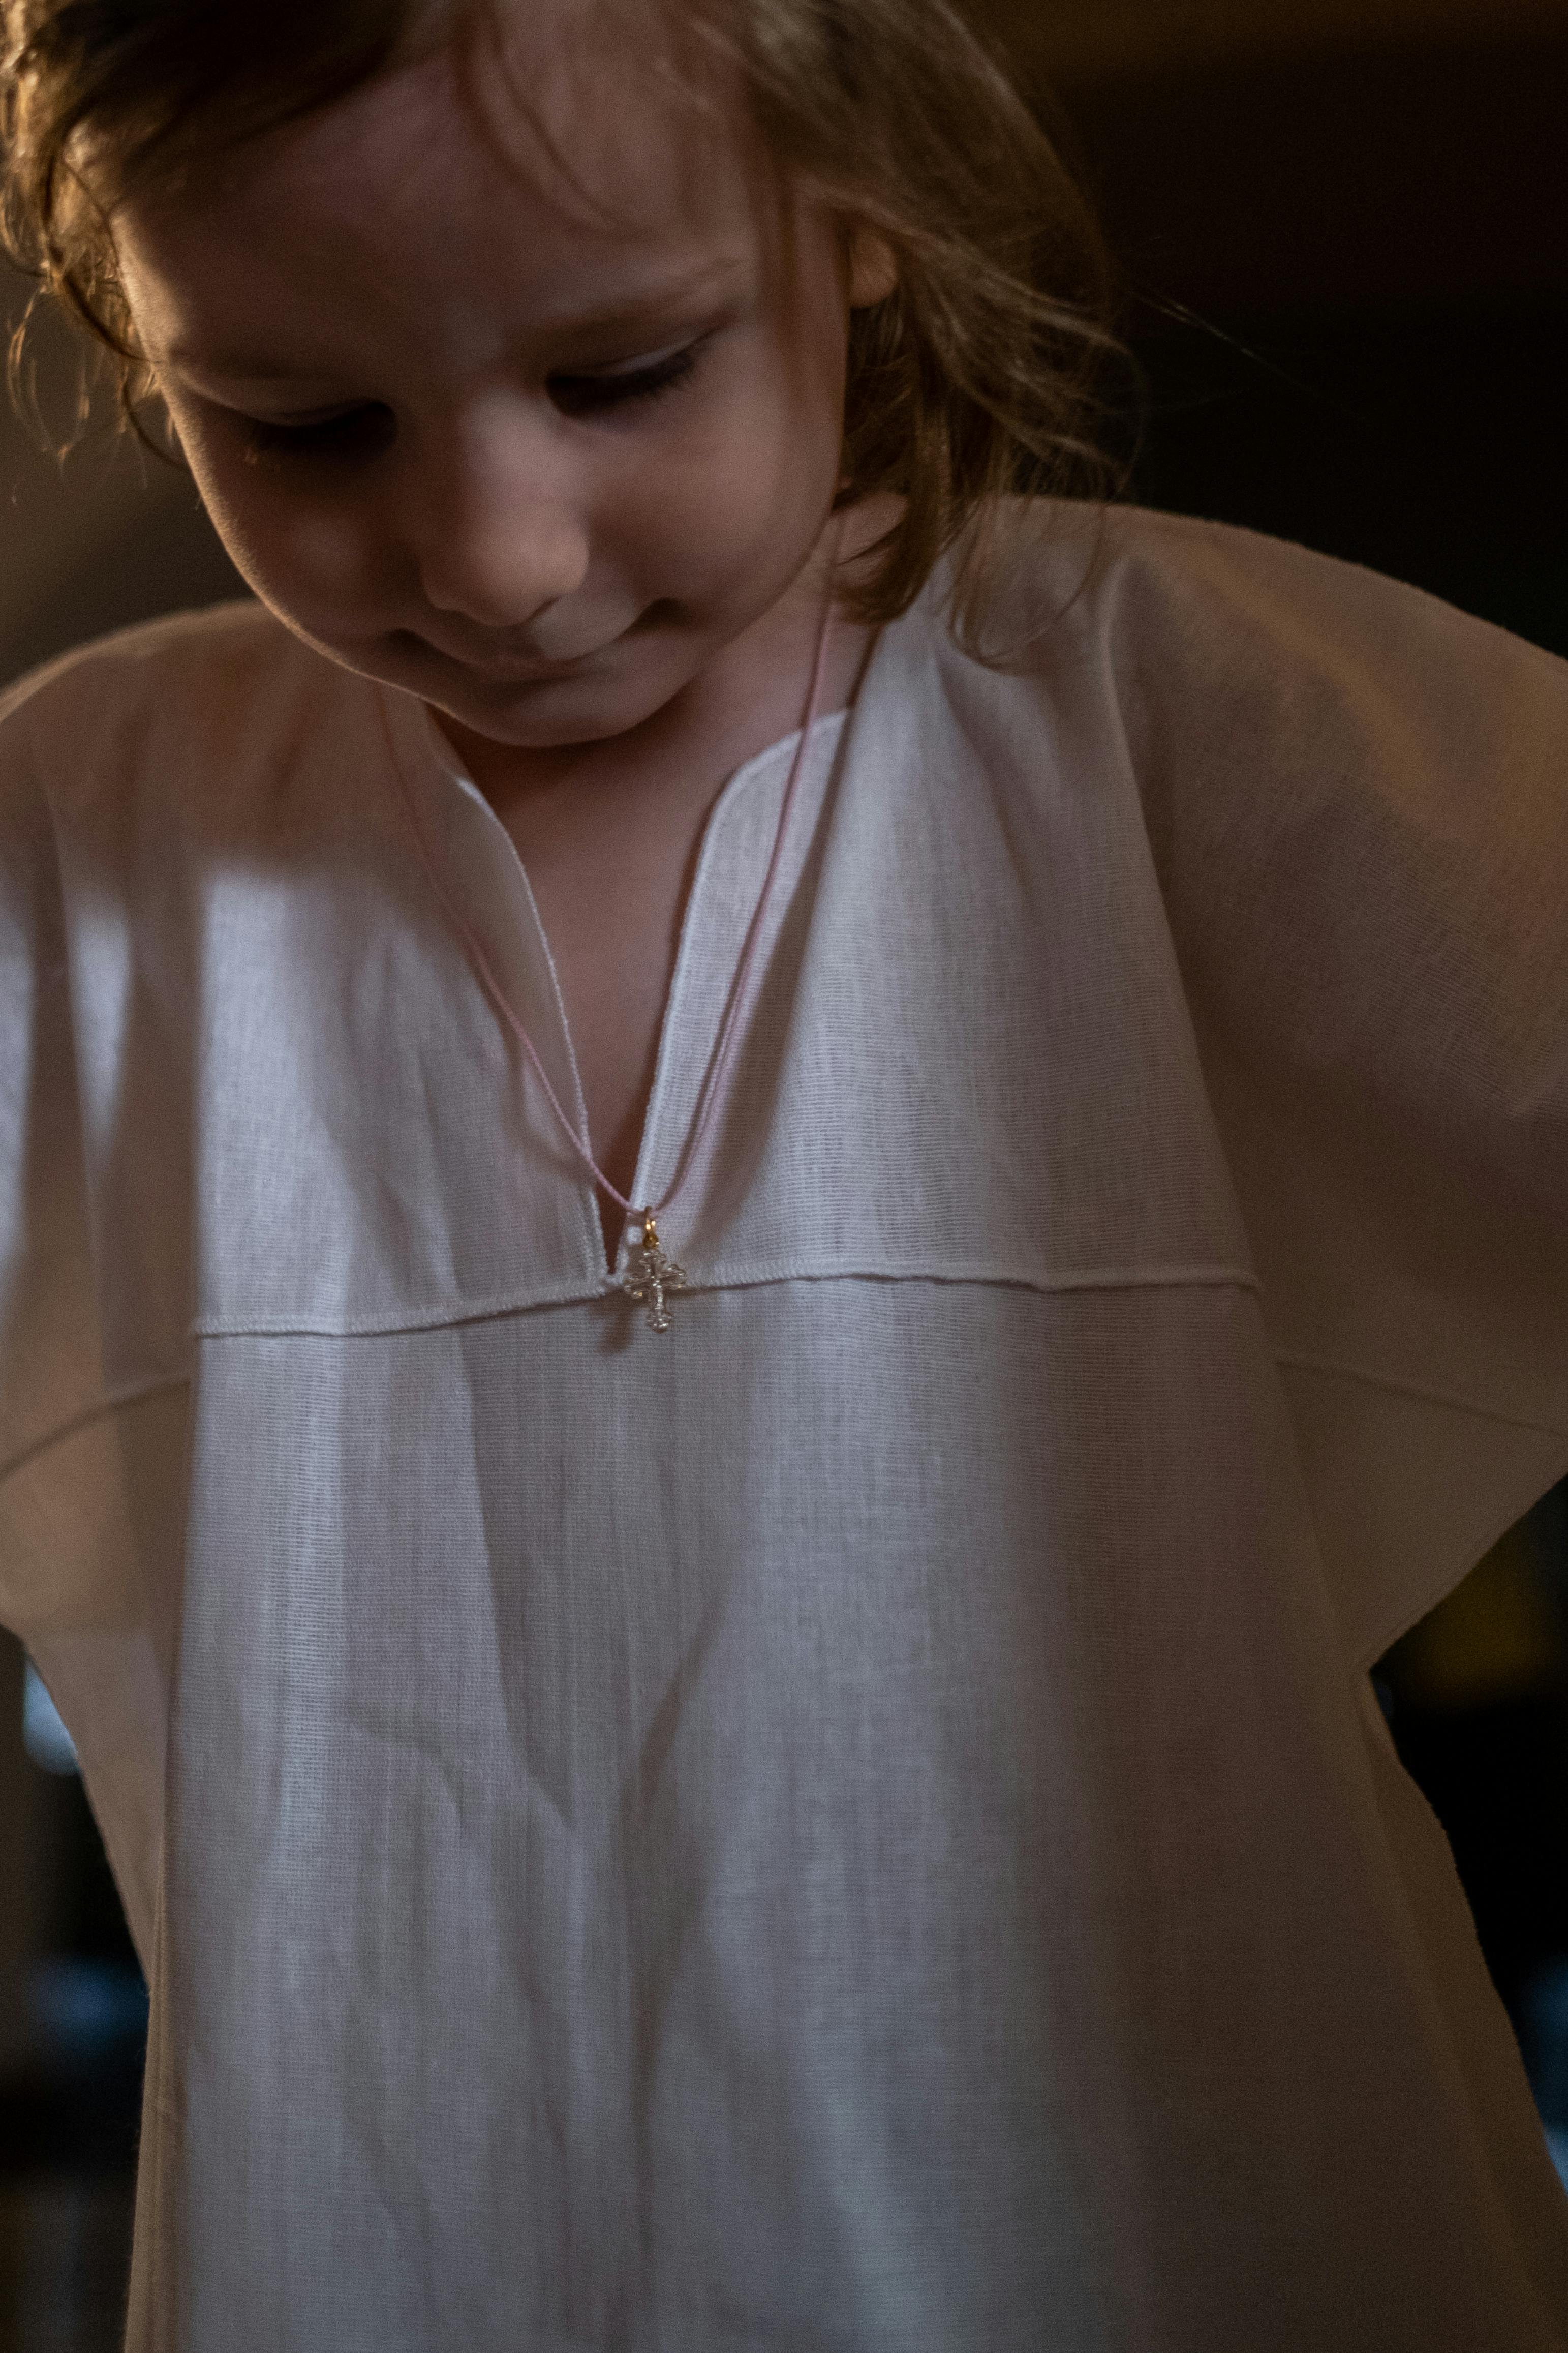 A little girl in a white dress looking down | Source: Pexels